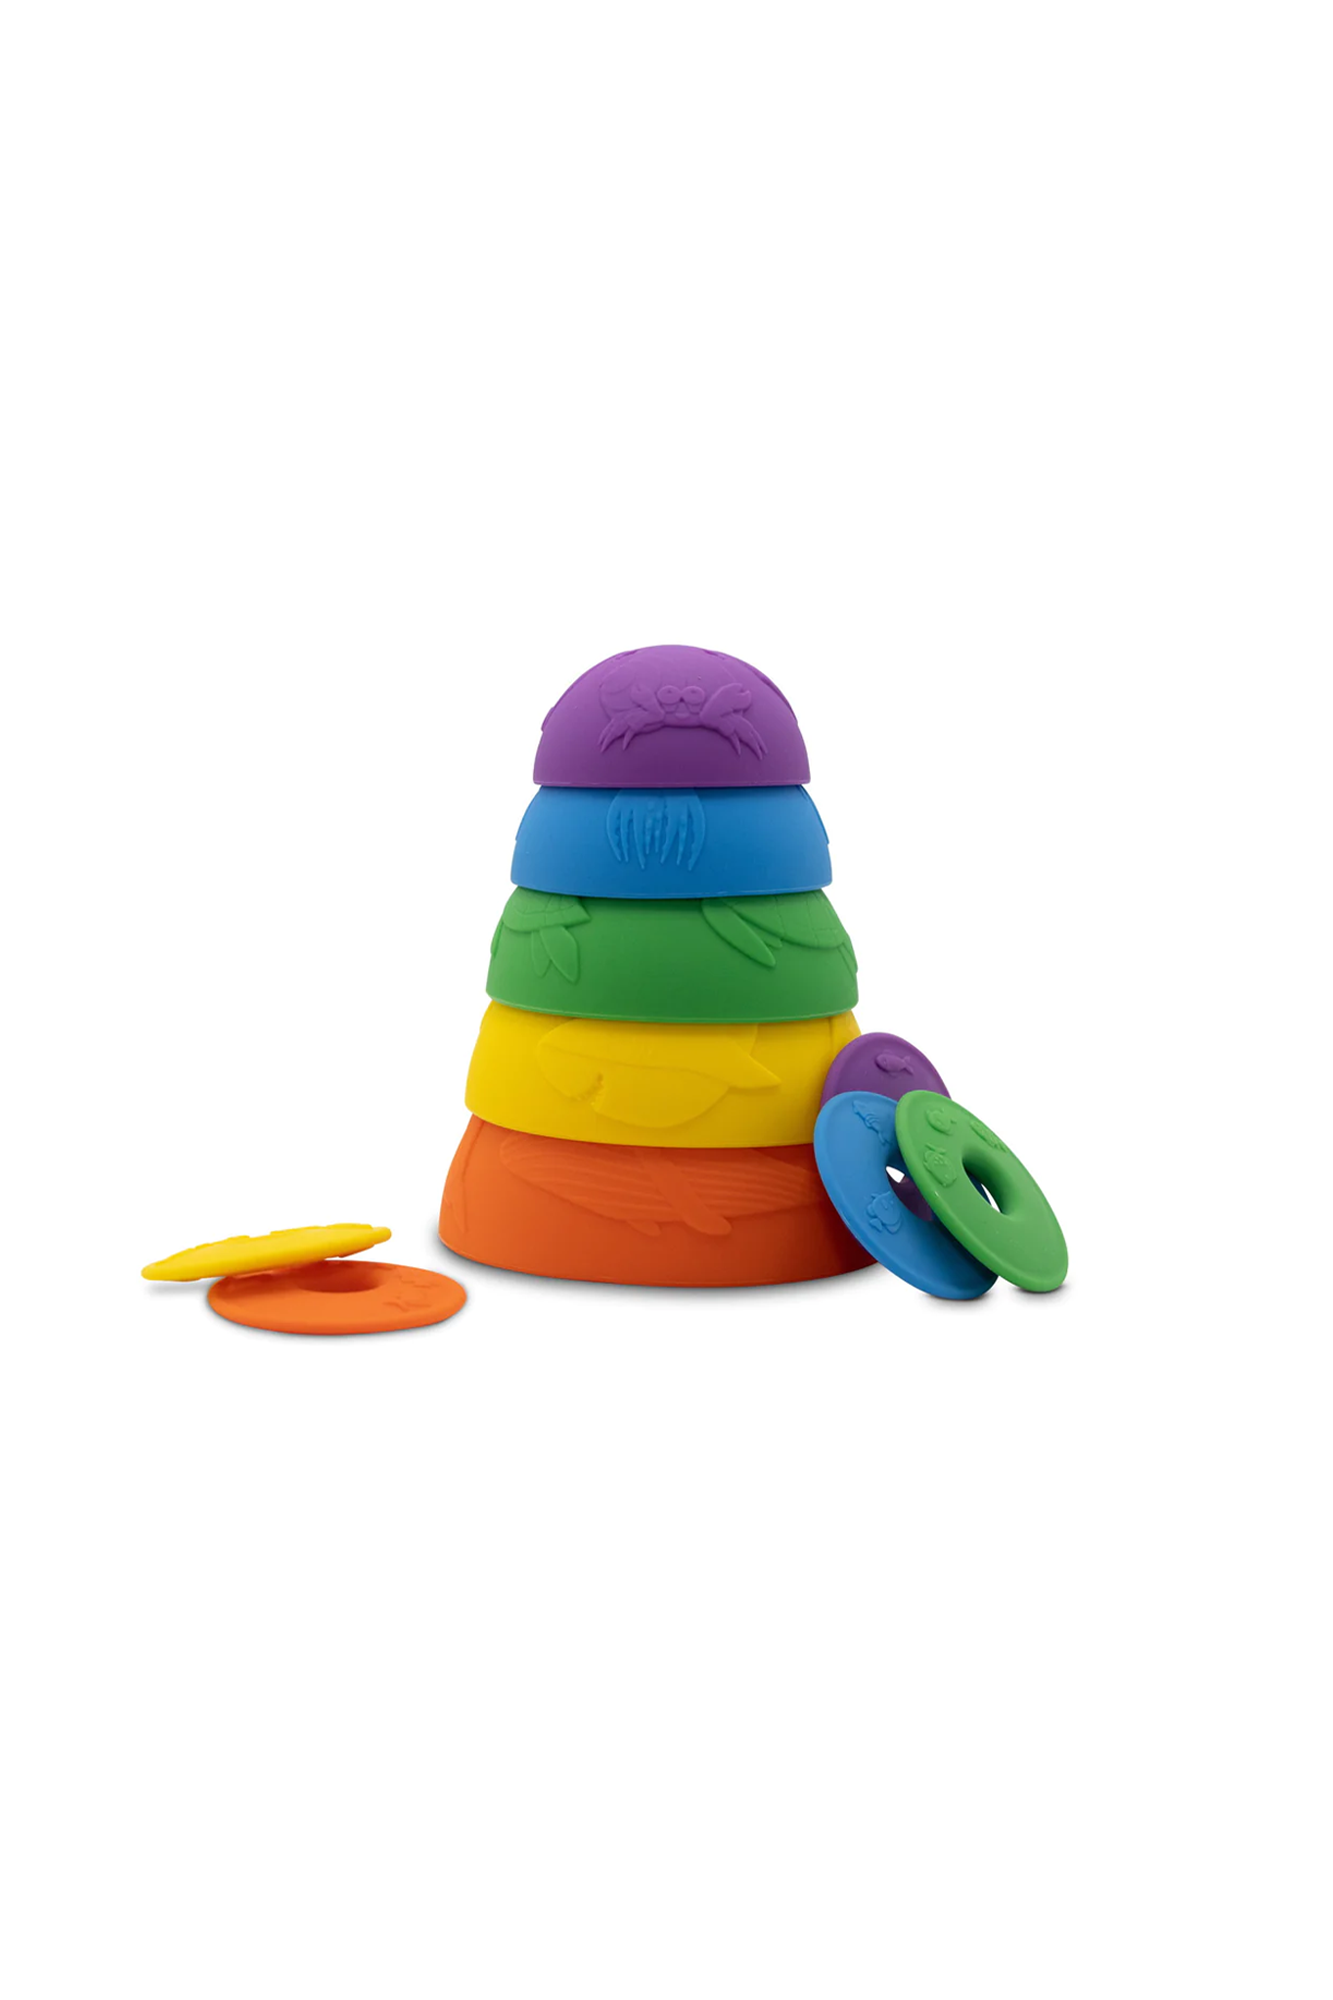 Jellystone Ocean Stacking Cups Pack of 5 - Rainbow Bright